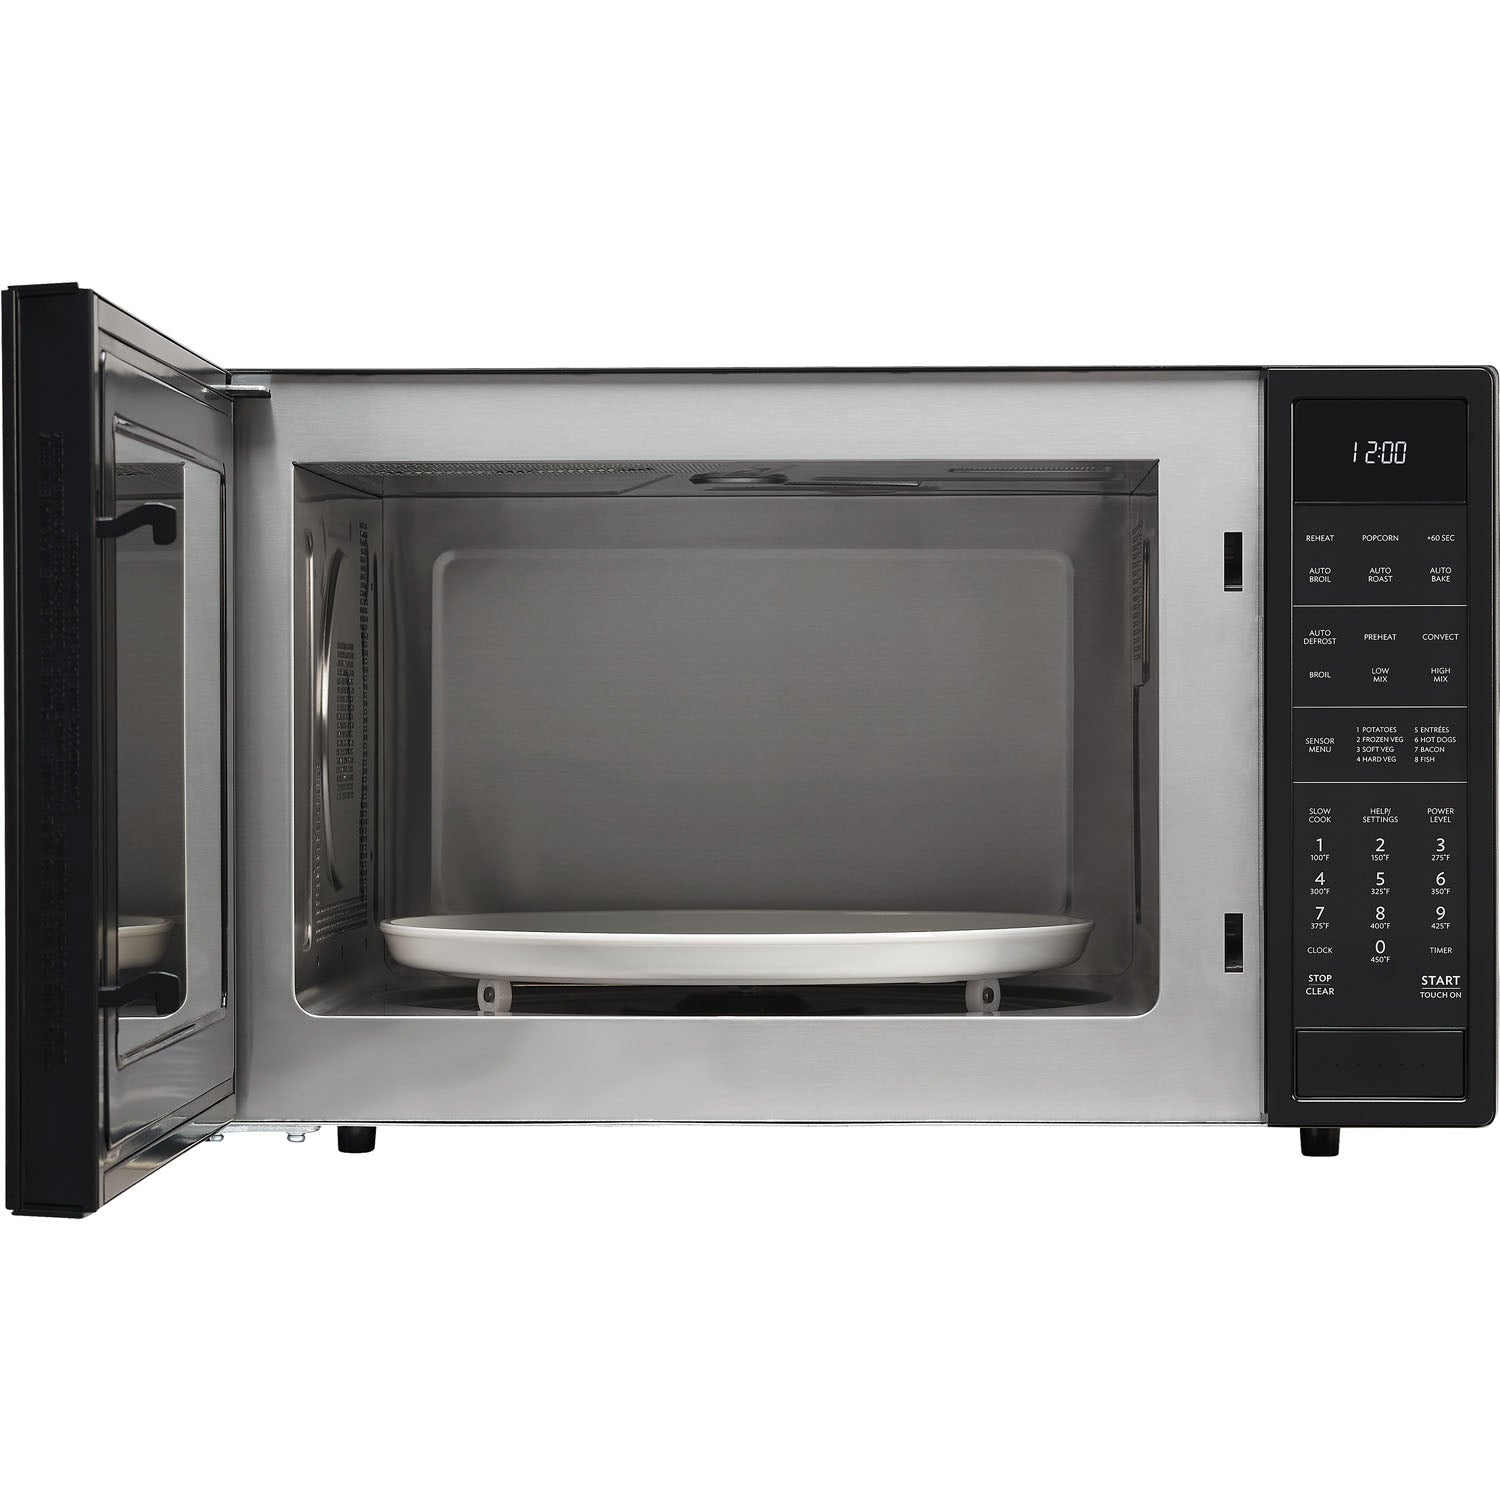 Sharp 1.5 cu. ft. 900W 25 in. Convection Microwave Oven with Color Options (SMC1585)